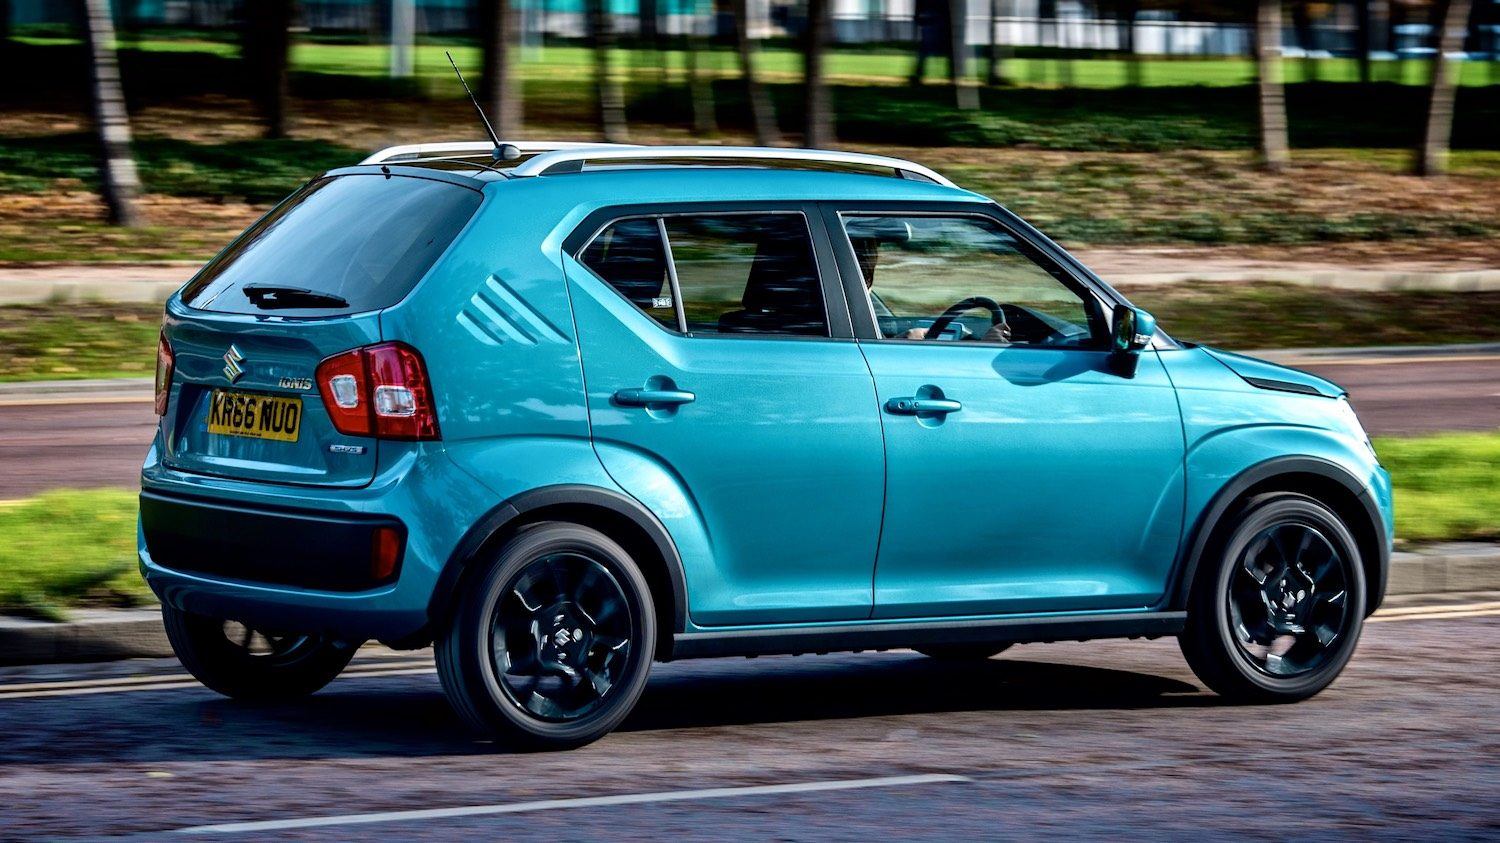 Drive.co.uk The Suzuki Ignis, quirky and fun, it stacks